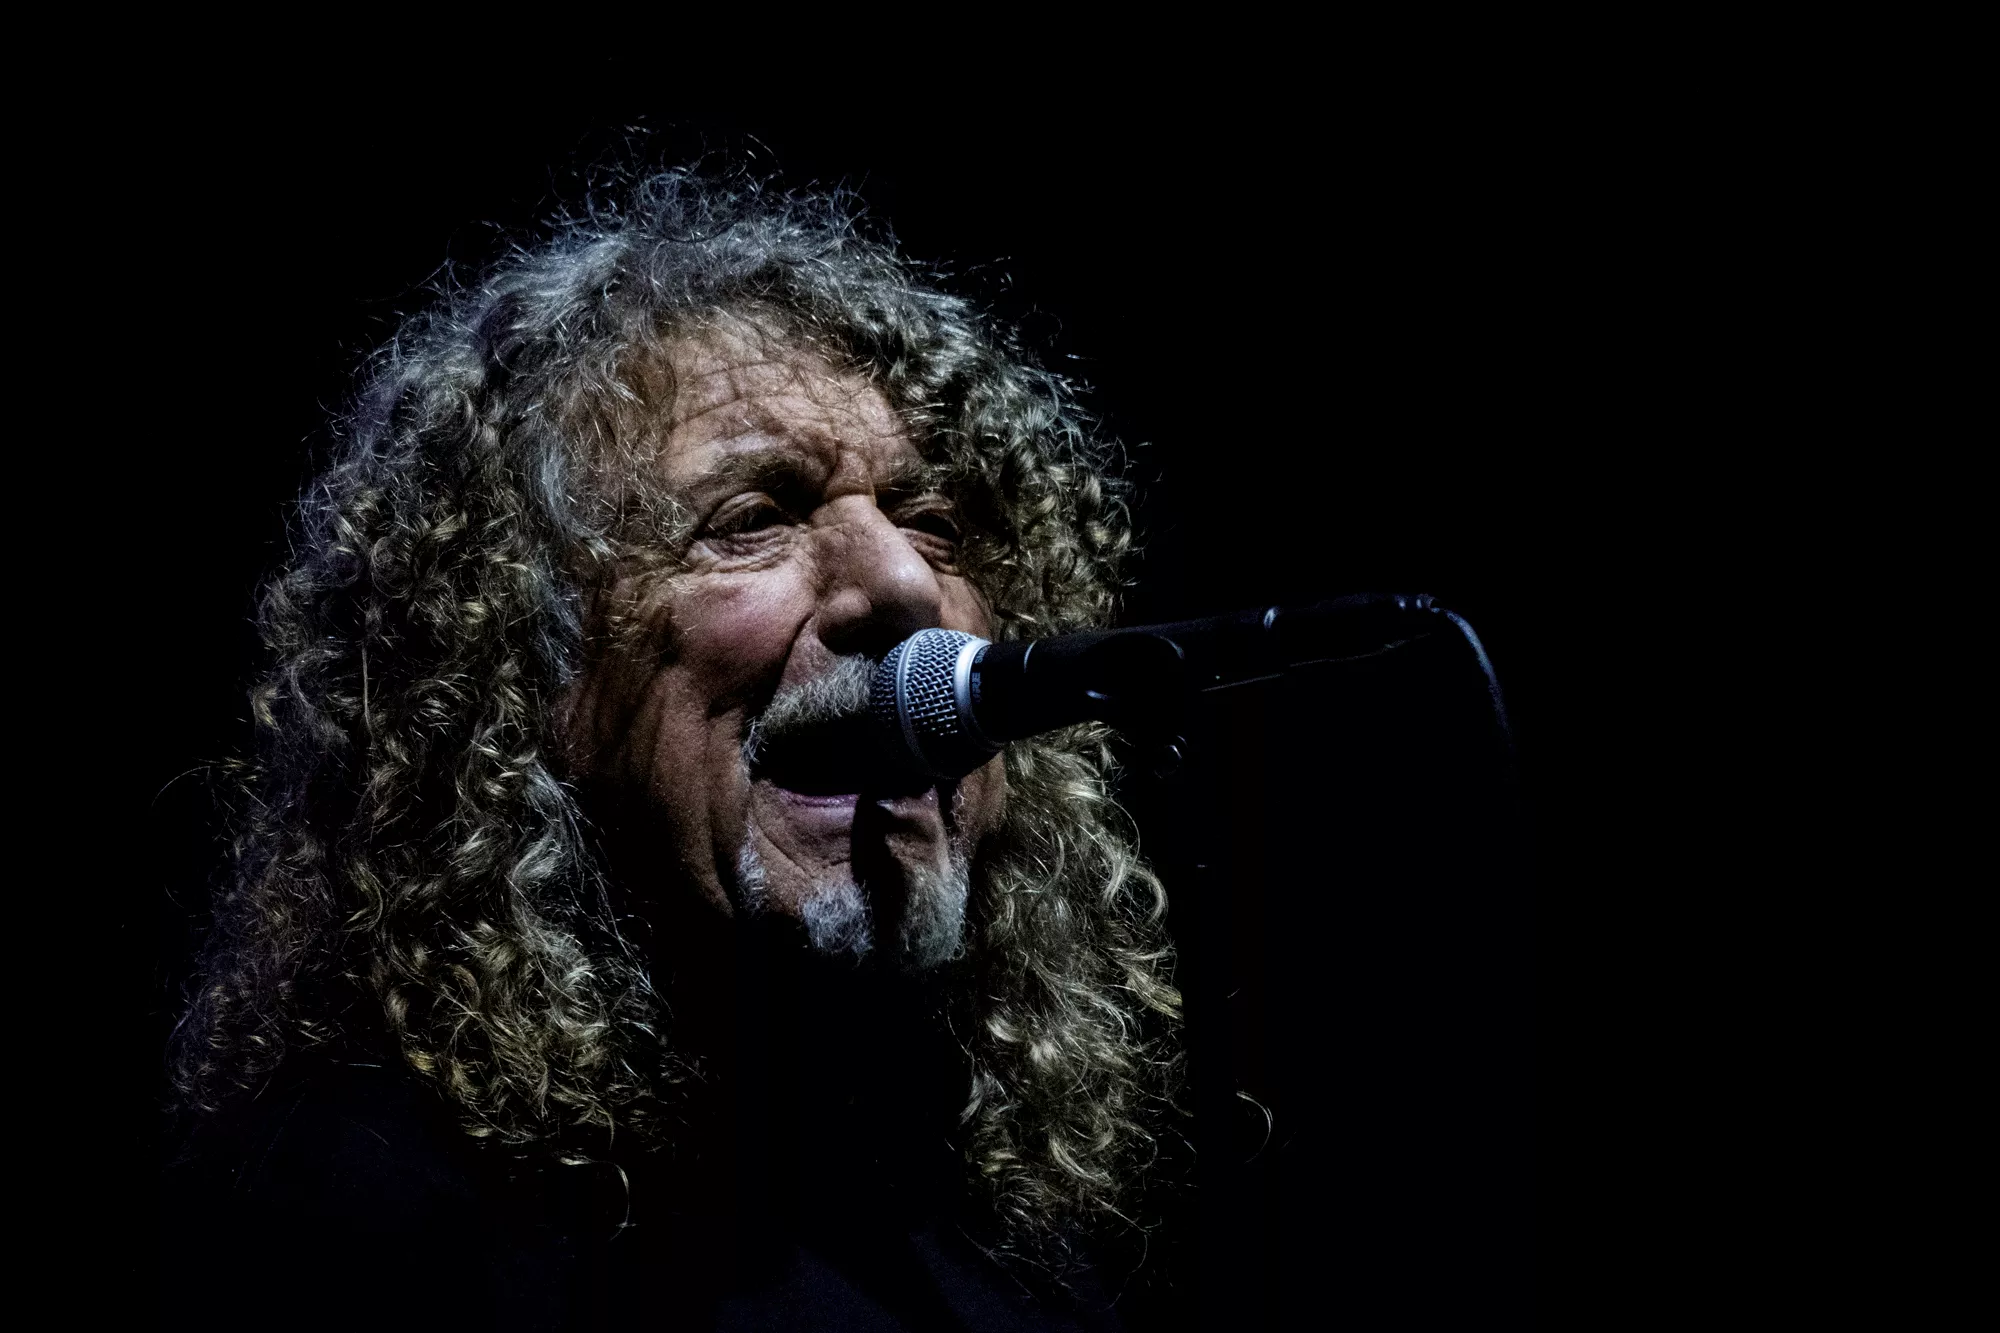 Roskilde Festival 2019 - Robert Plant & The Sensational Space Shifters